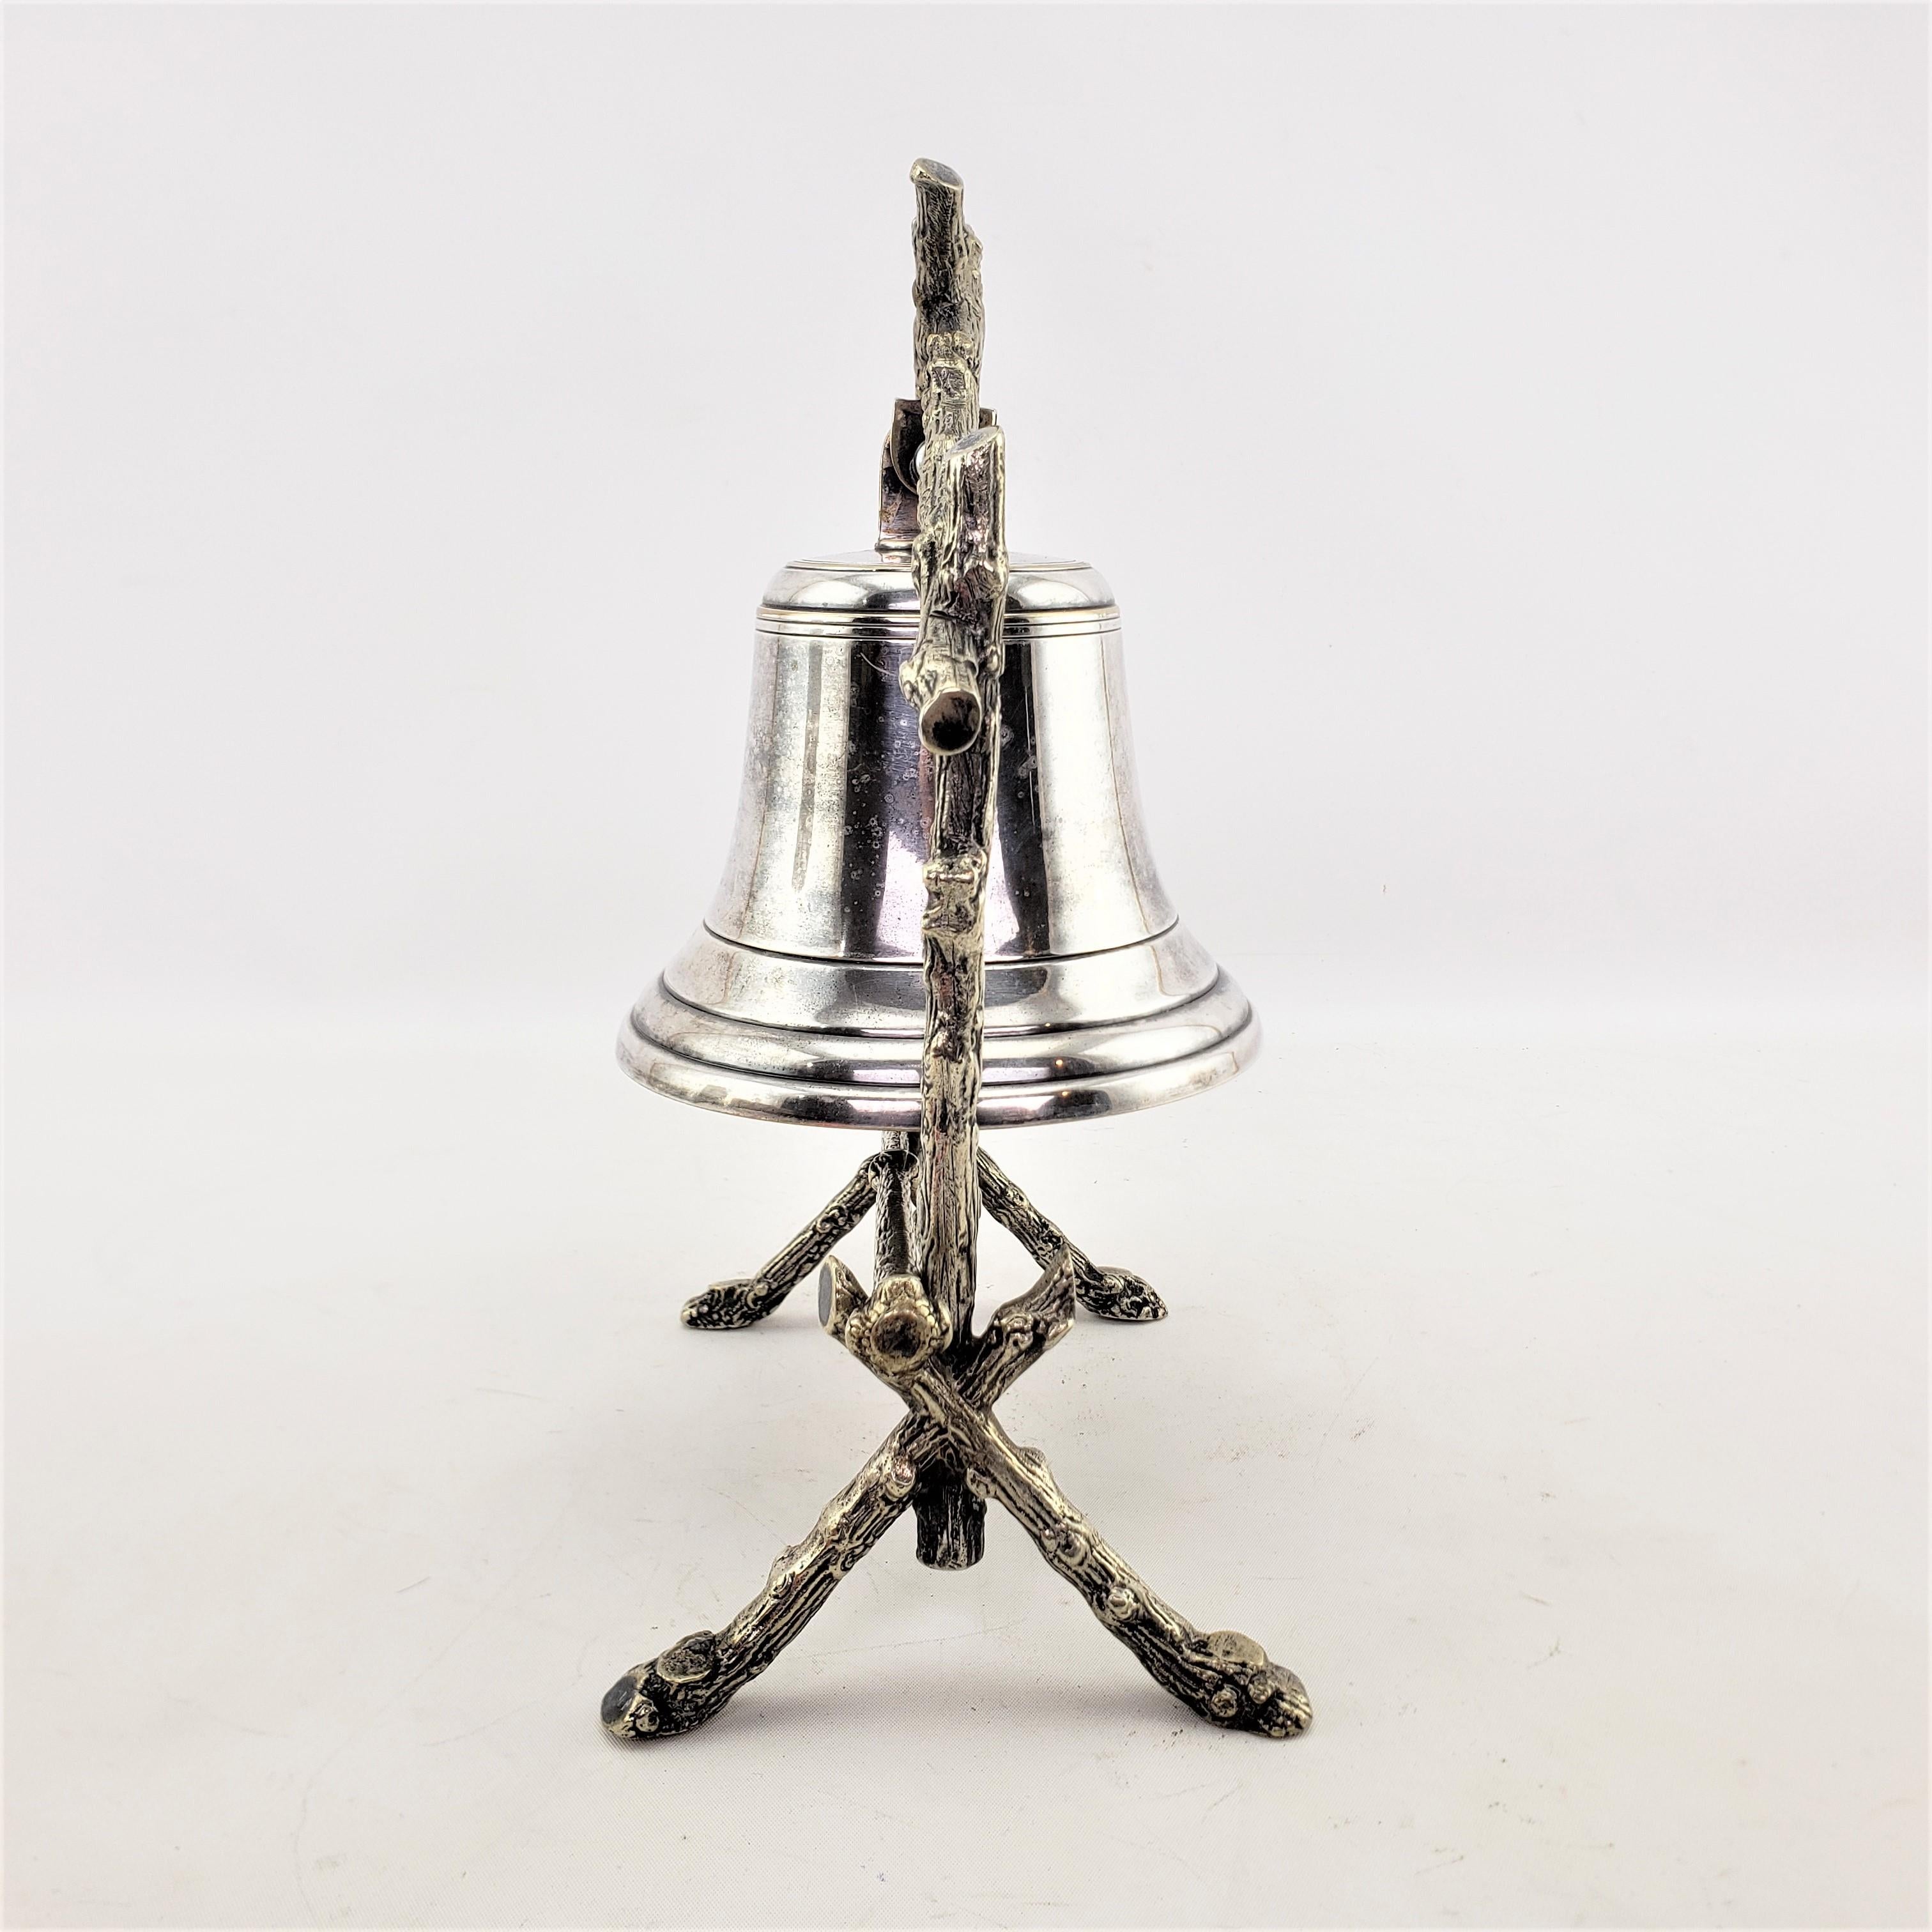 English Antique Silver Plated Dinner Bell or Gong with Figural Twig & Branch Motif For Sale